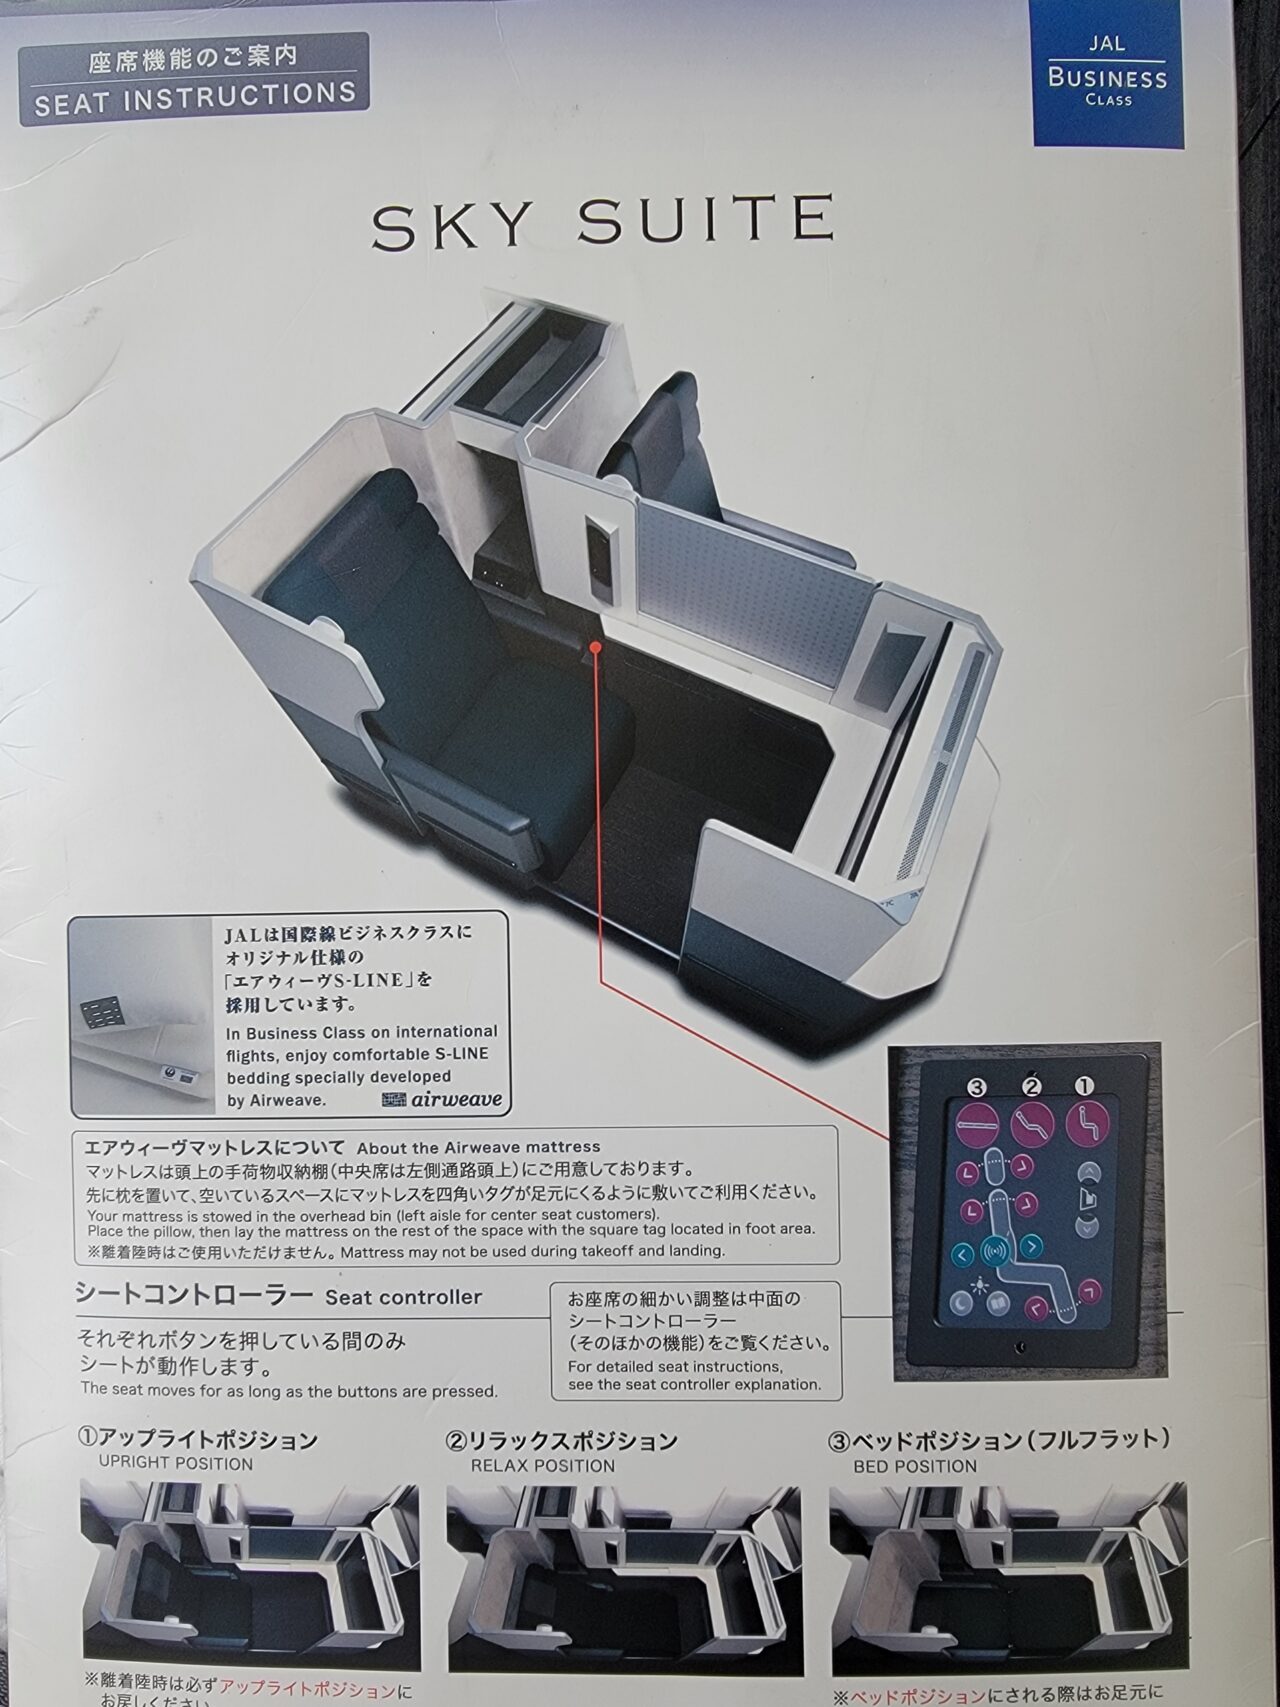 JALビジネスクラスシート777-300ER JAL SKY SUITE 